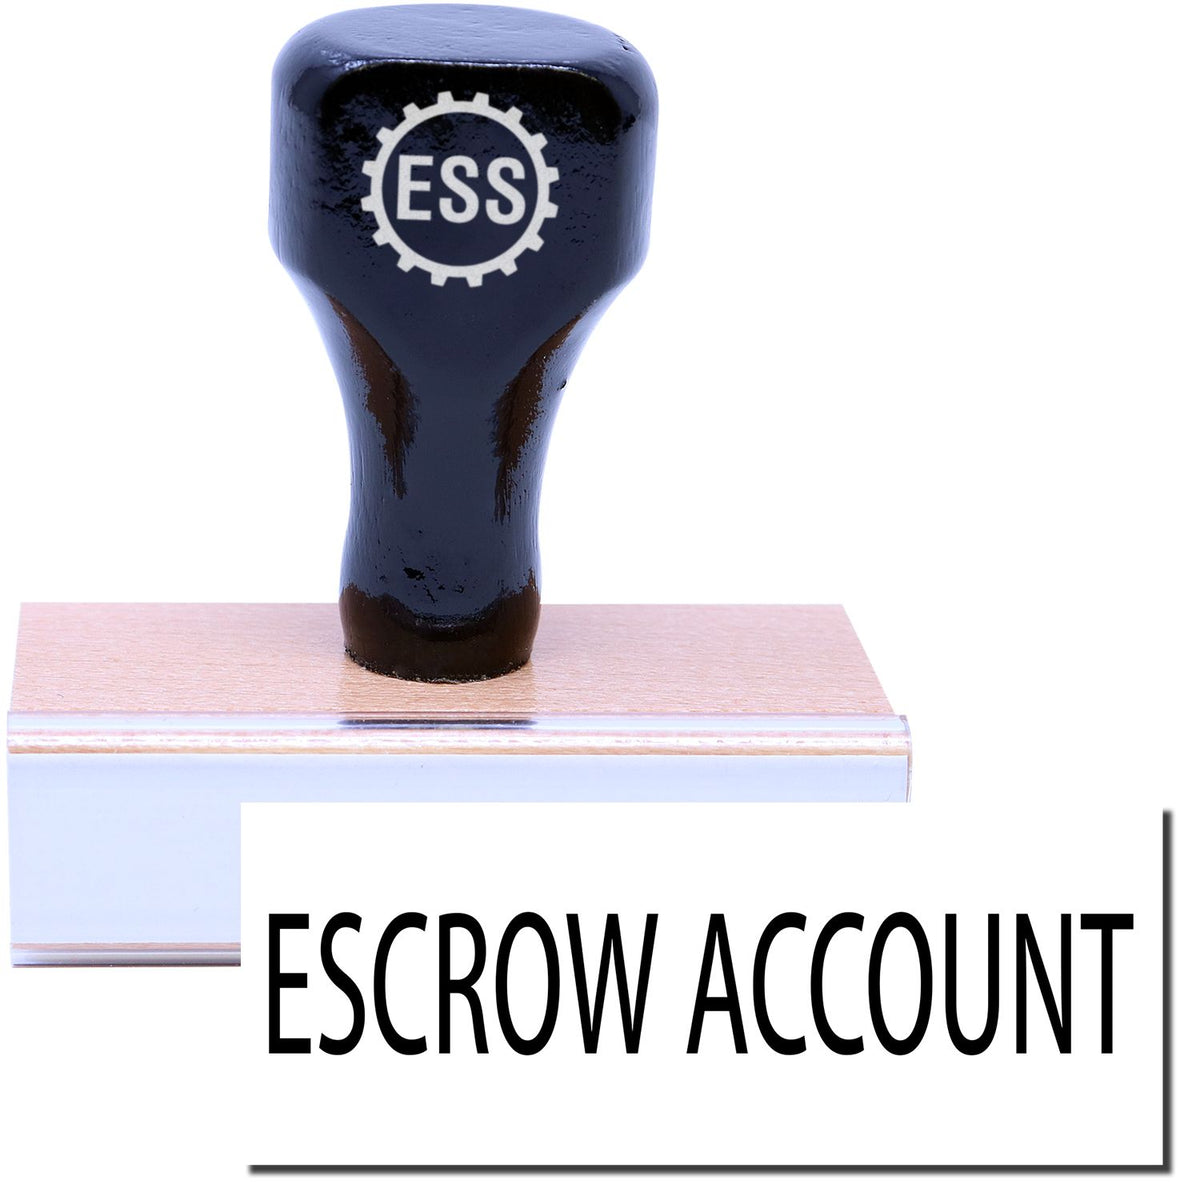 A stock office rubber stamp with a stamped image showing how the text &quot;ESCROW ACCOUNT&quot; in a large font is displayed after stamping.